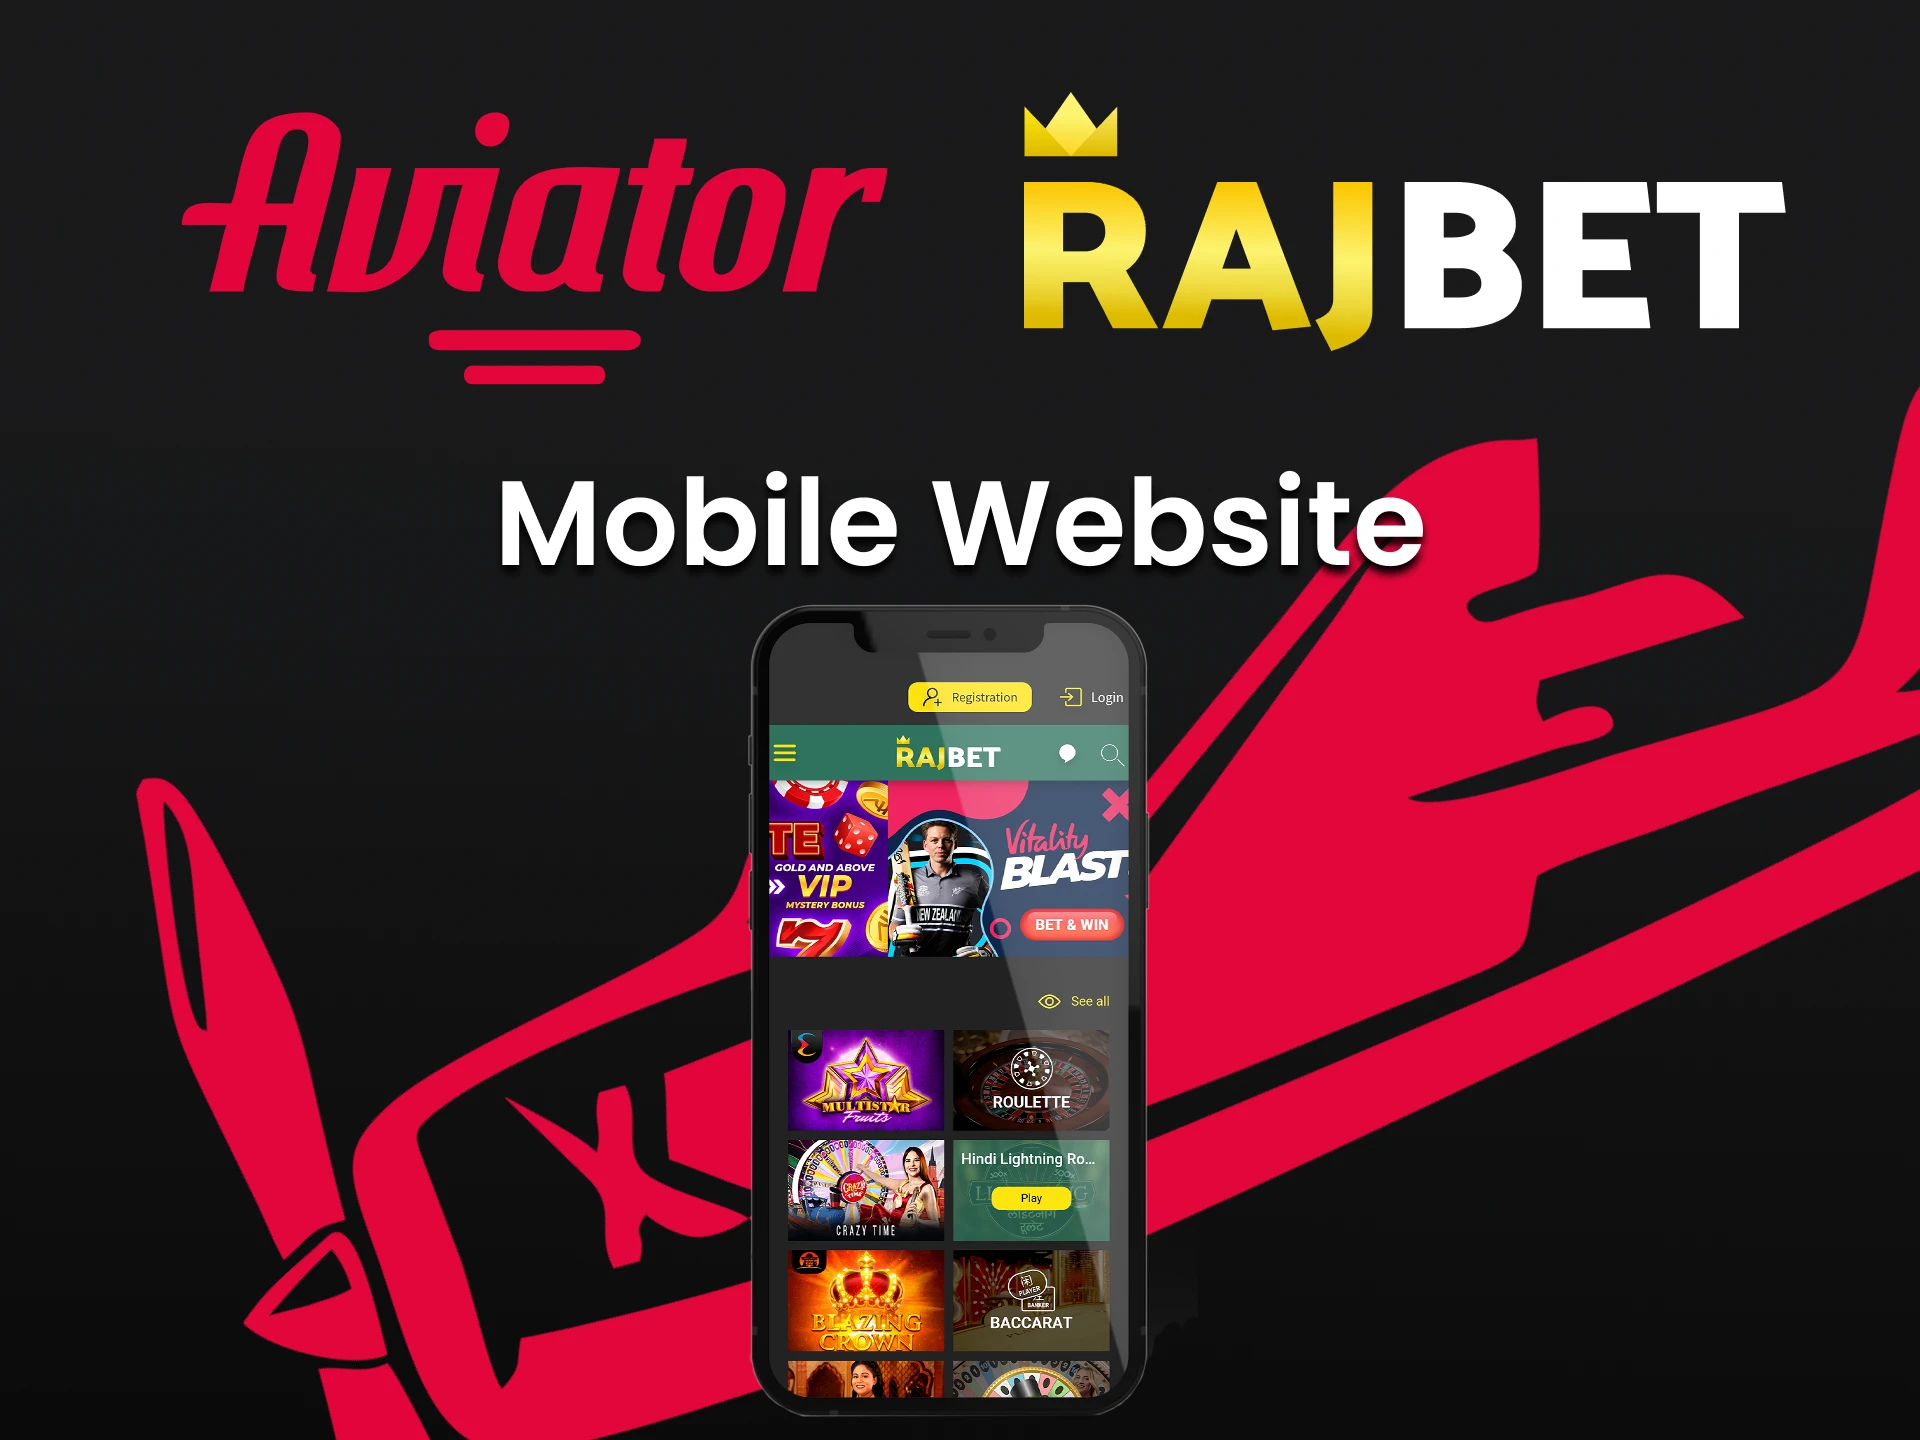 Use your smartphone to visit the Rajbet service.